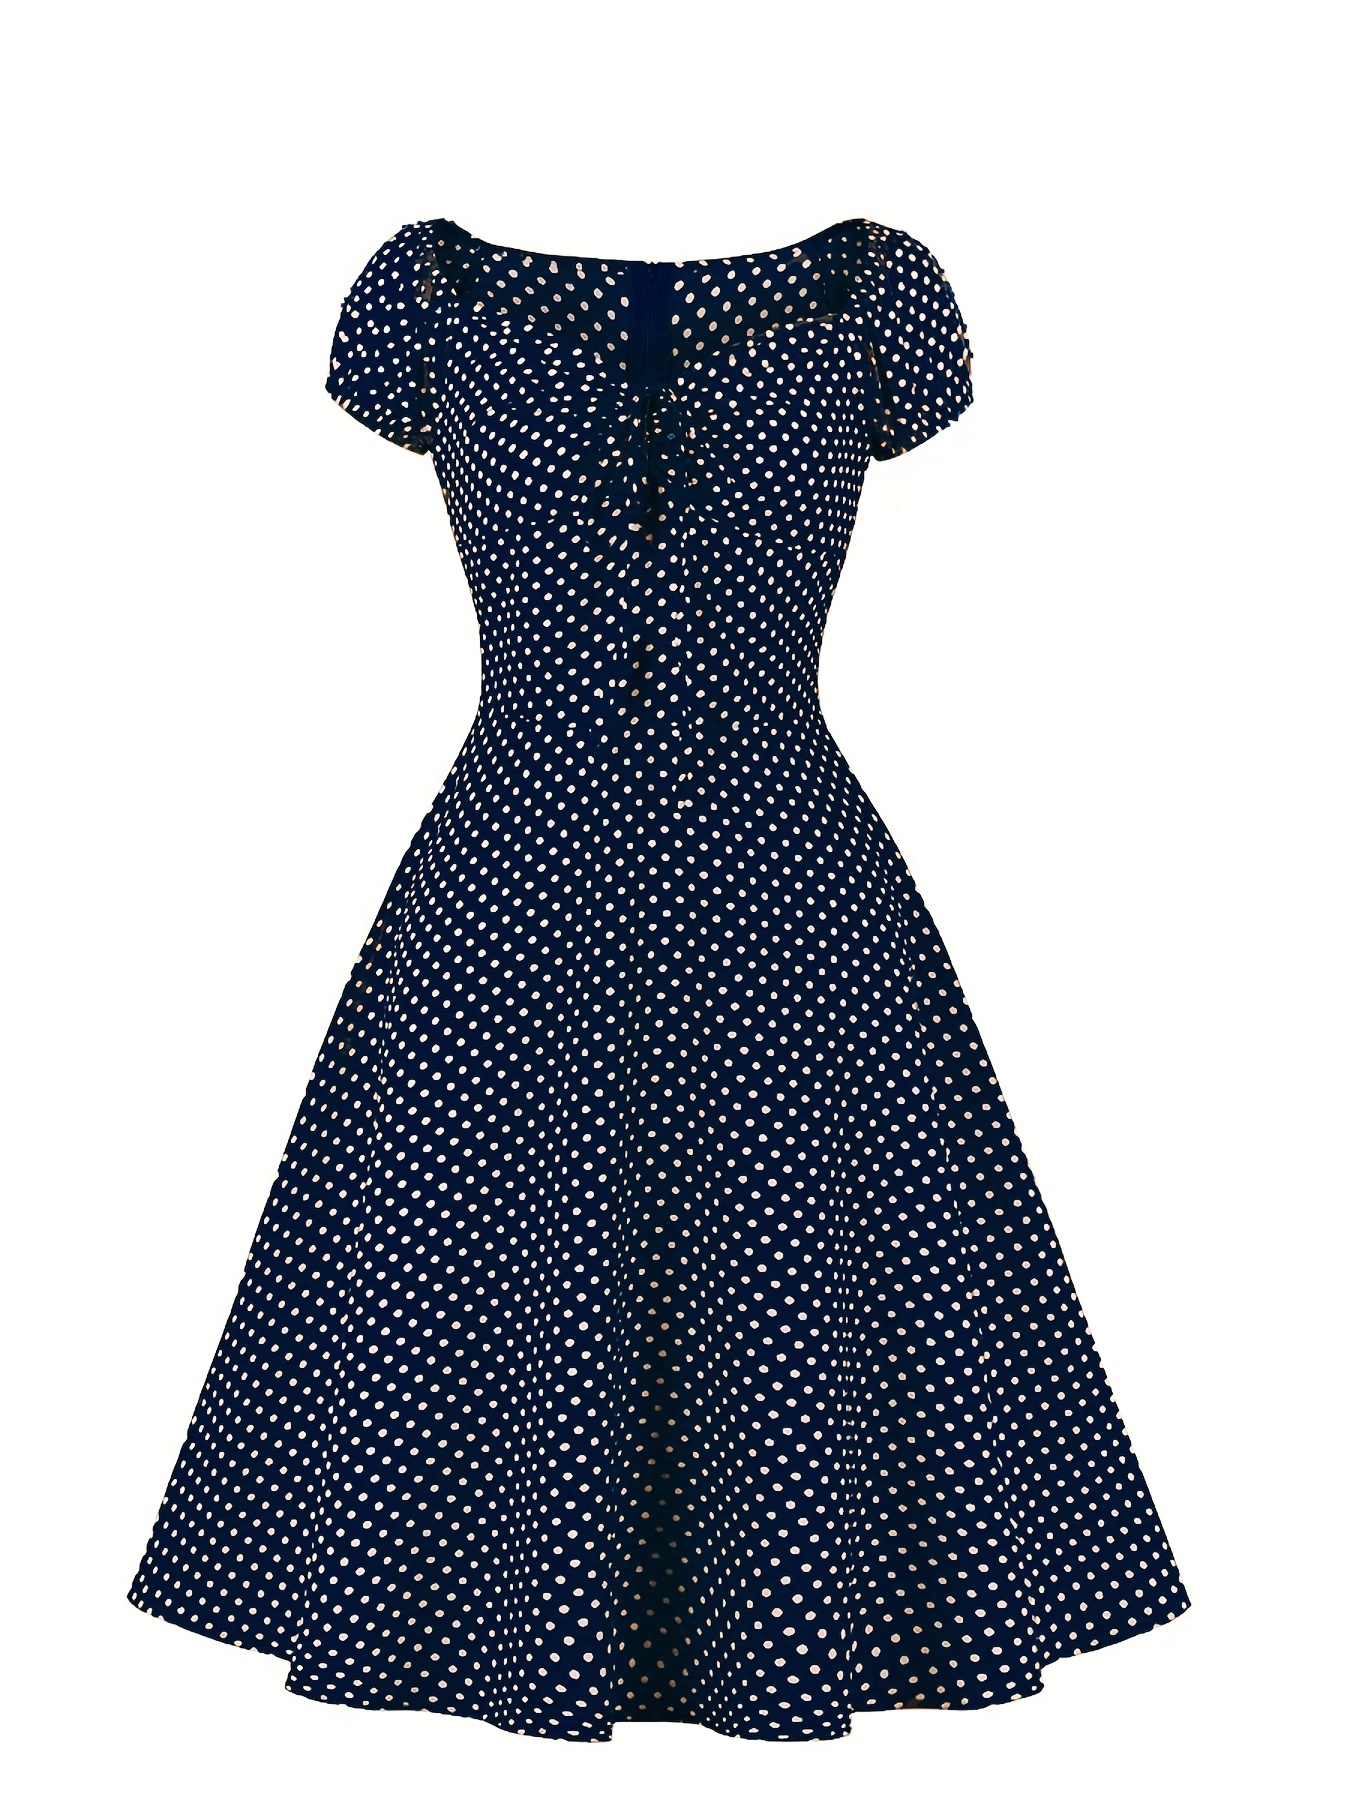 Vintage Dresses for Women 1950s Printed Short Sleeve Tank Top Swing  Rockabilly Cocktail Tea Party 50s Outfits